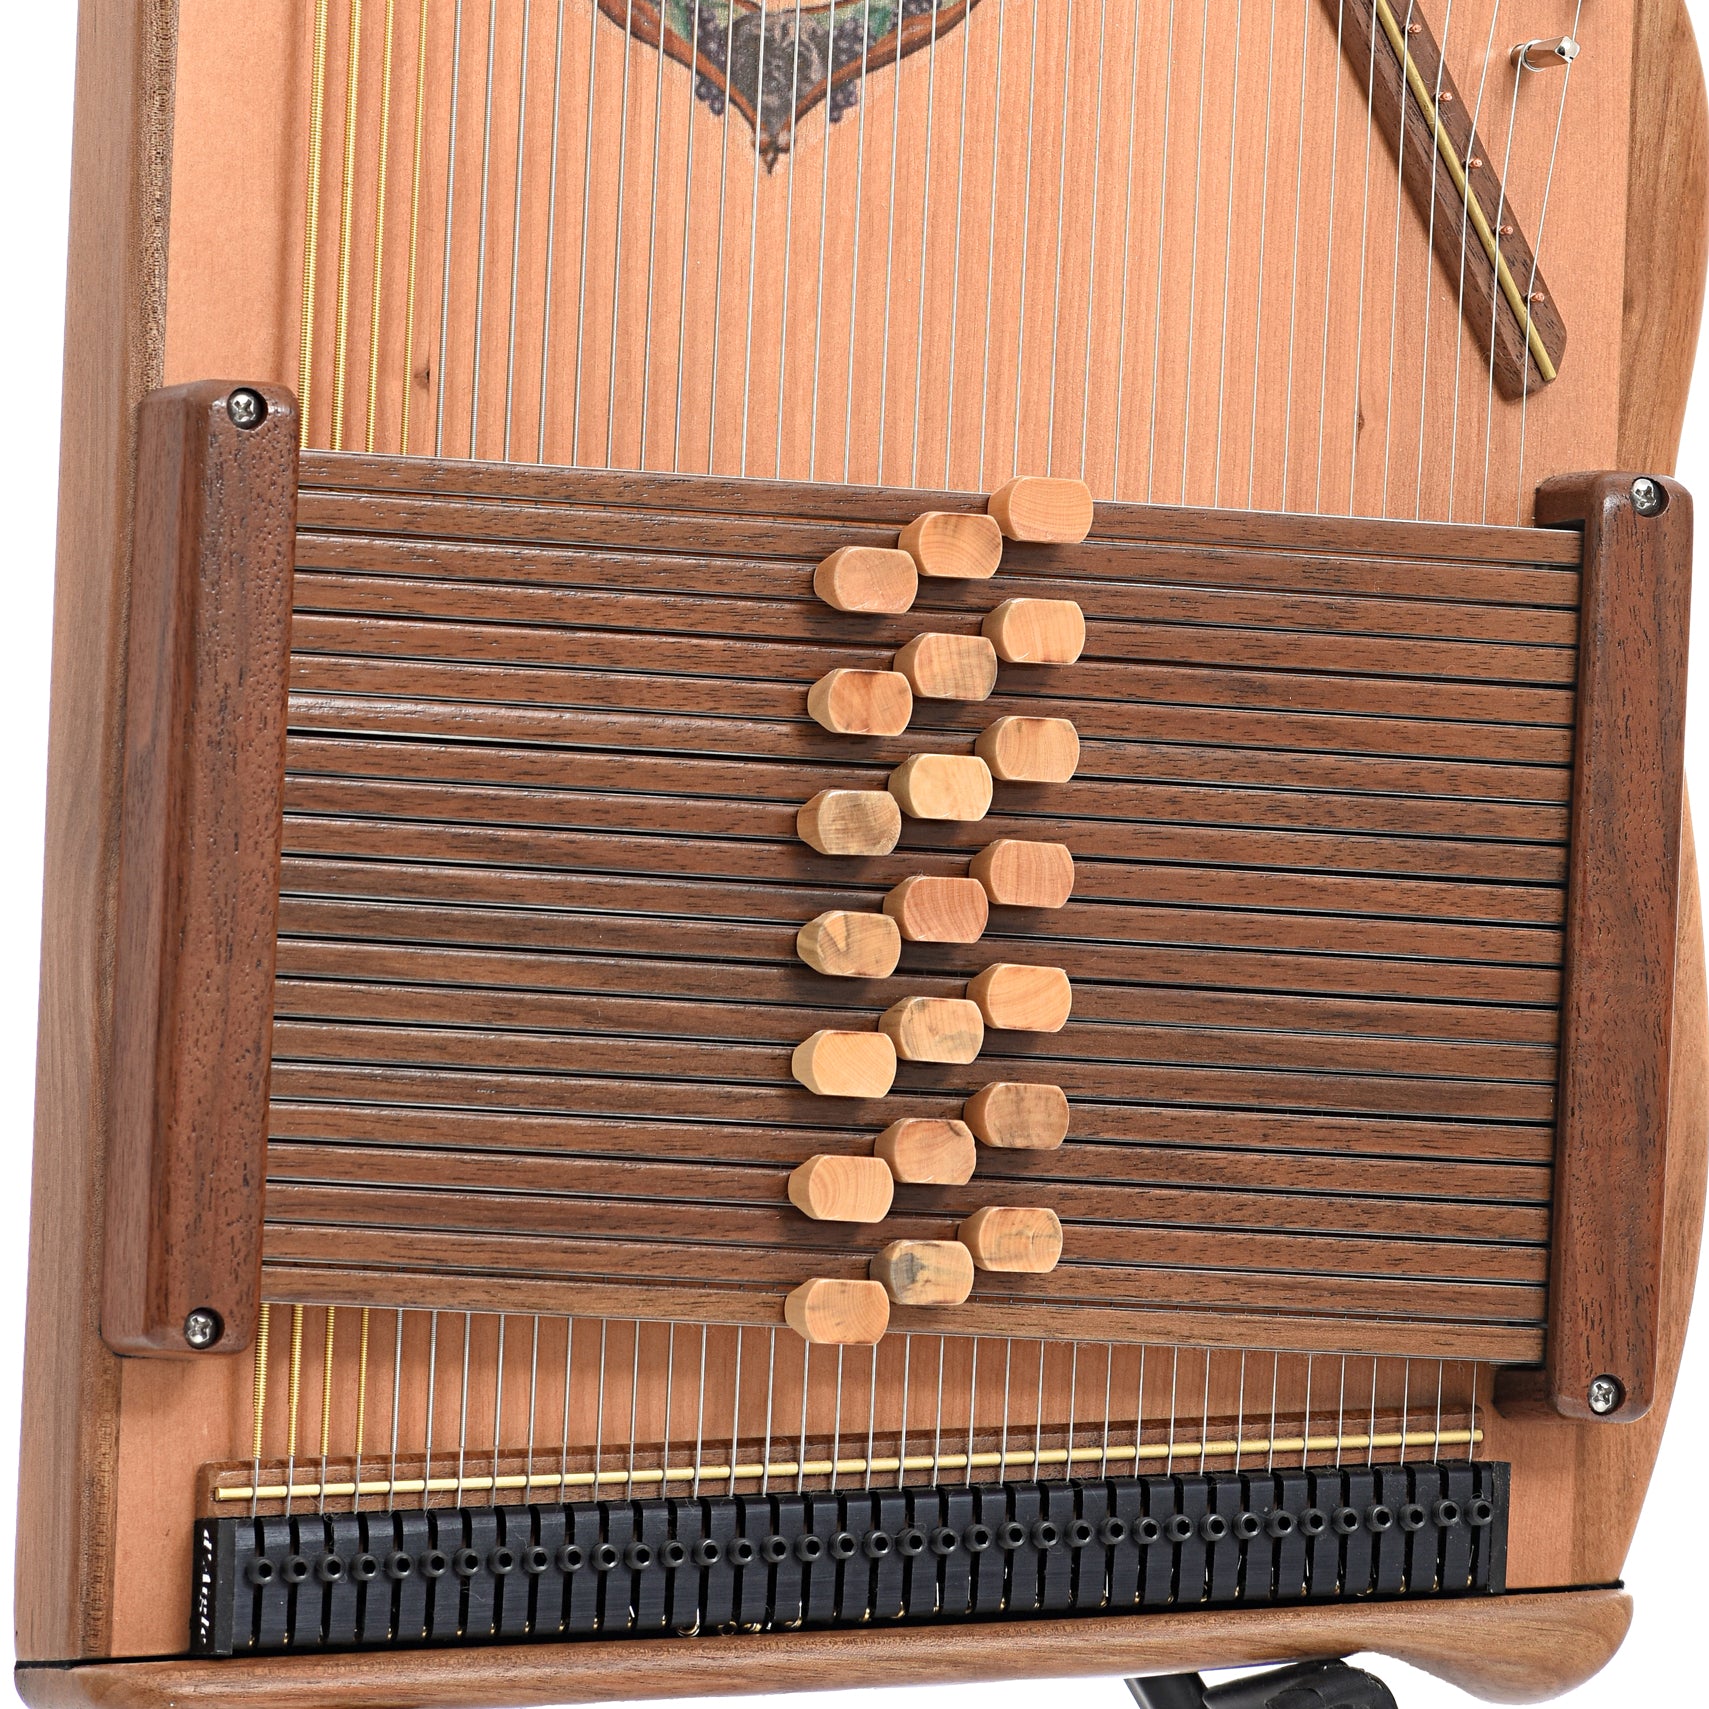 Tailpiece, bridge and Chord bars of D'Aigle TLC Traditional Luthier's Classic 21-Bar Autoharp & Gigbag